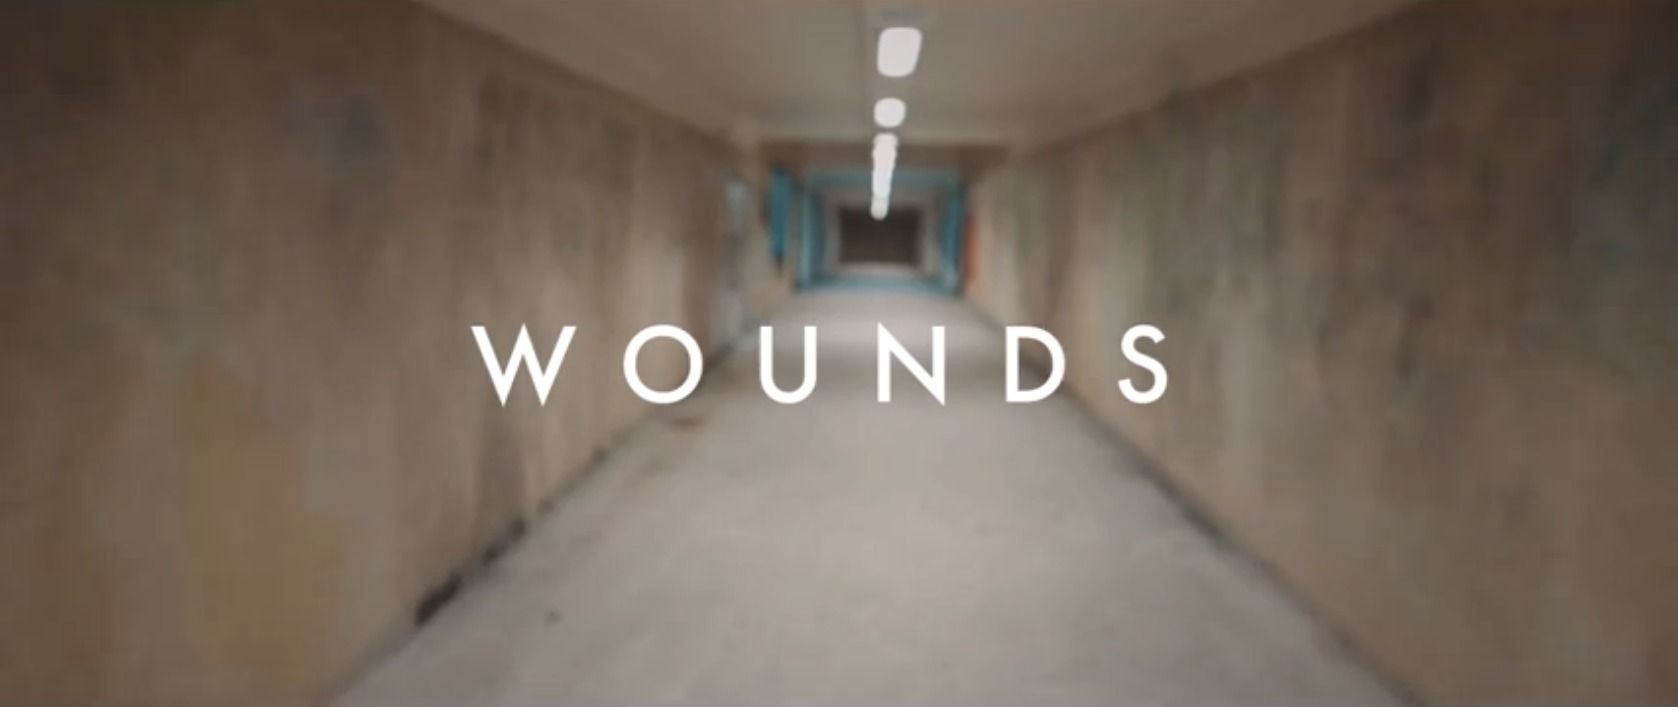 wounds - ULYSSE 